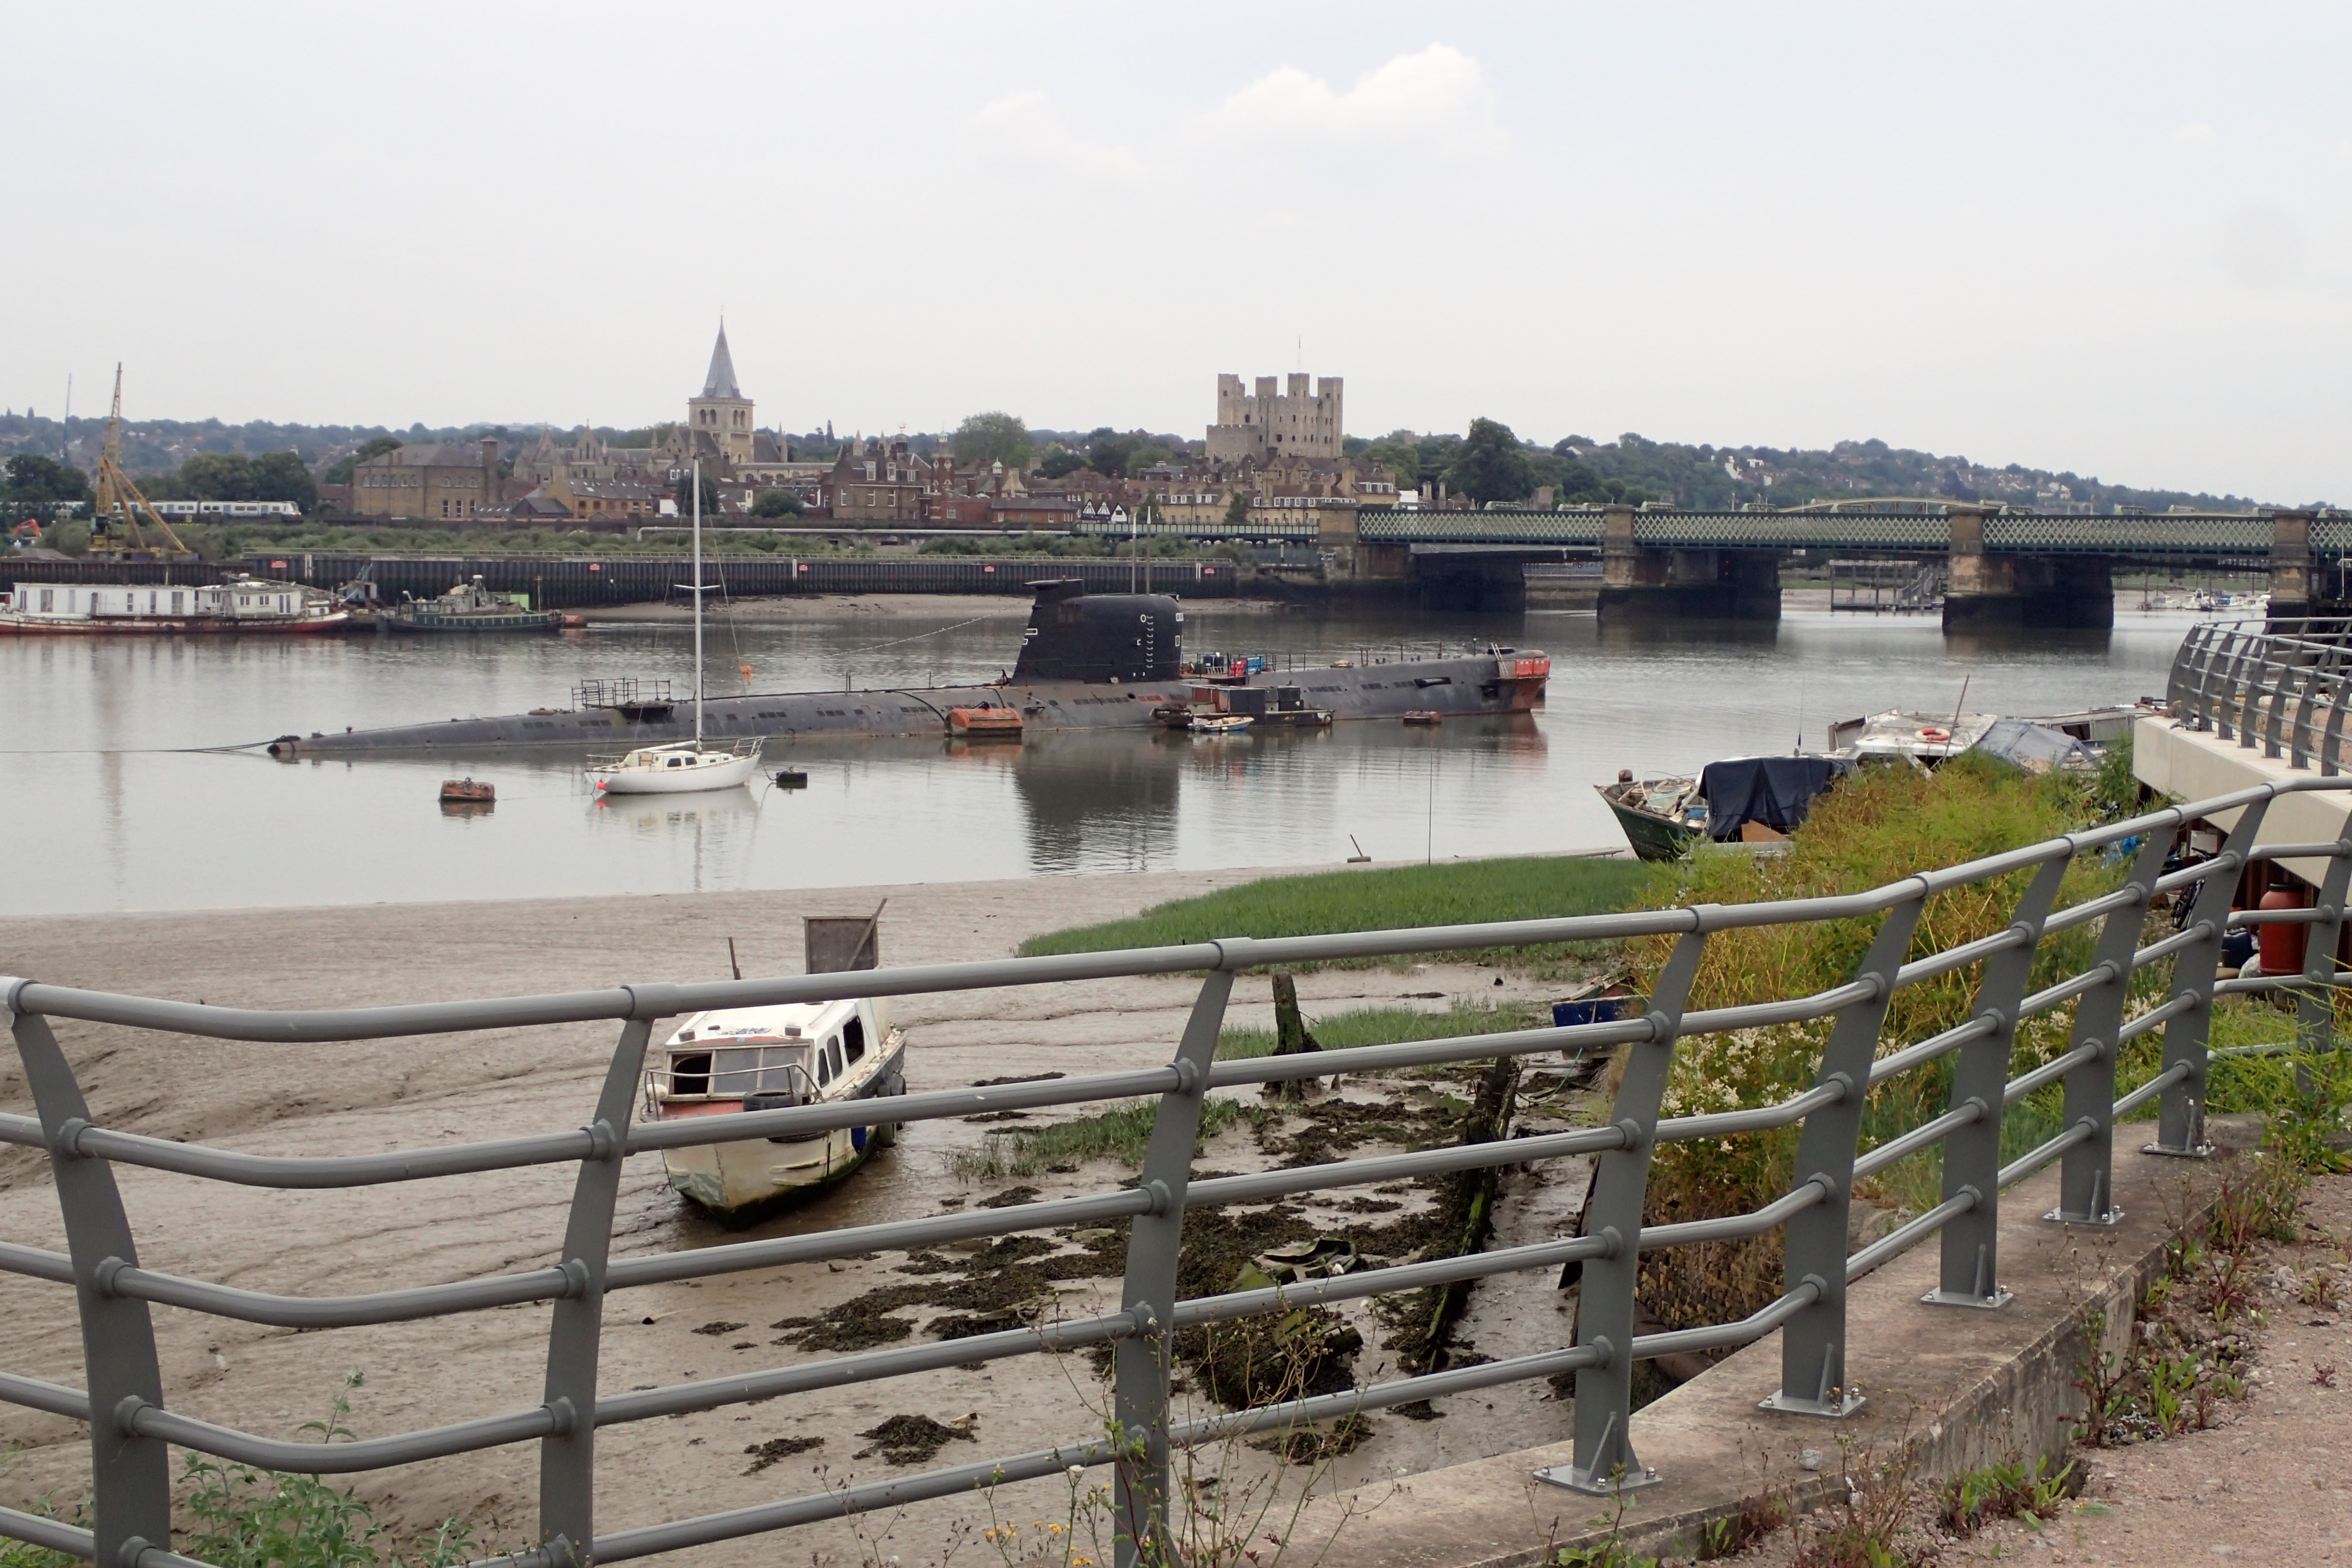 Russian Submarine moored at Strood. Rochester Cathedral and Castle beyond